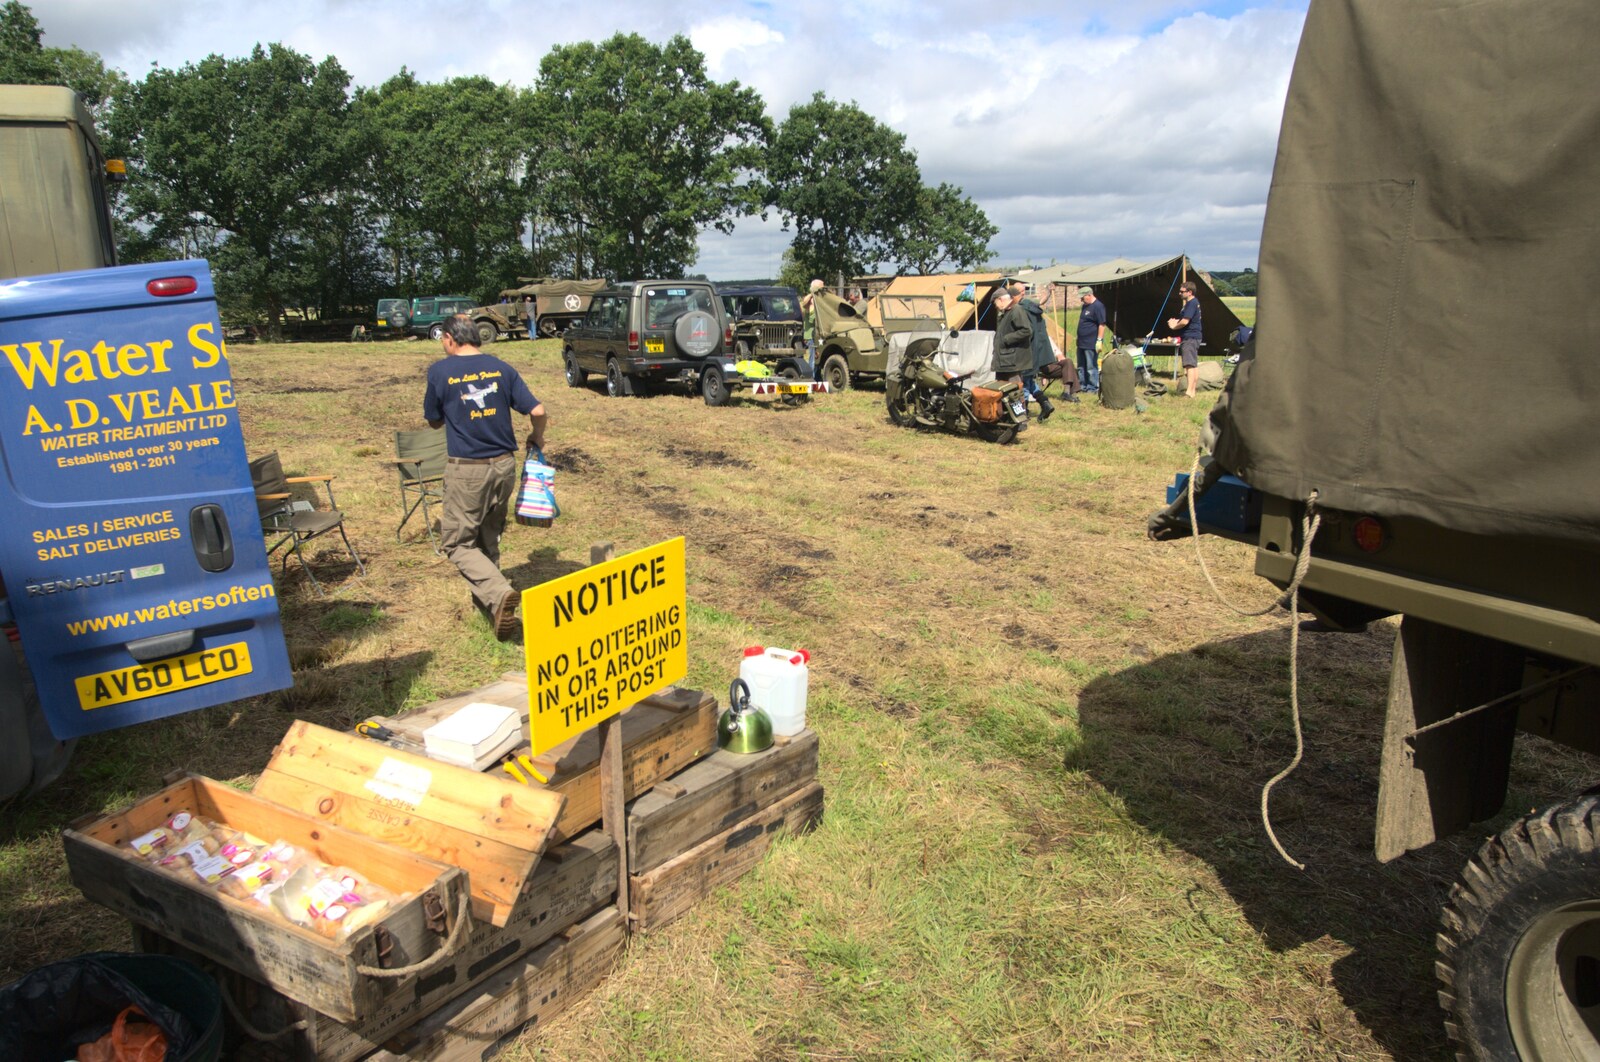 A 'no loitering' sign protects an ammo box from Maurice's Mustang Hangar Dance, Hardwick Airfield, Norfolk - 16th July 2011